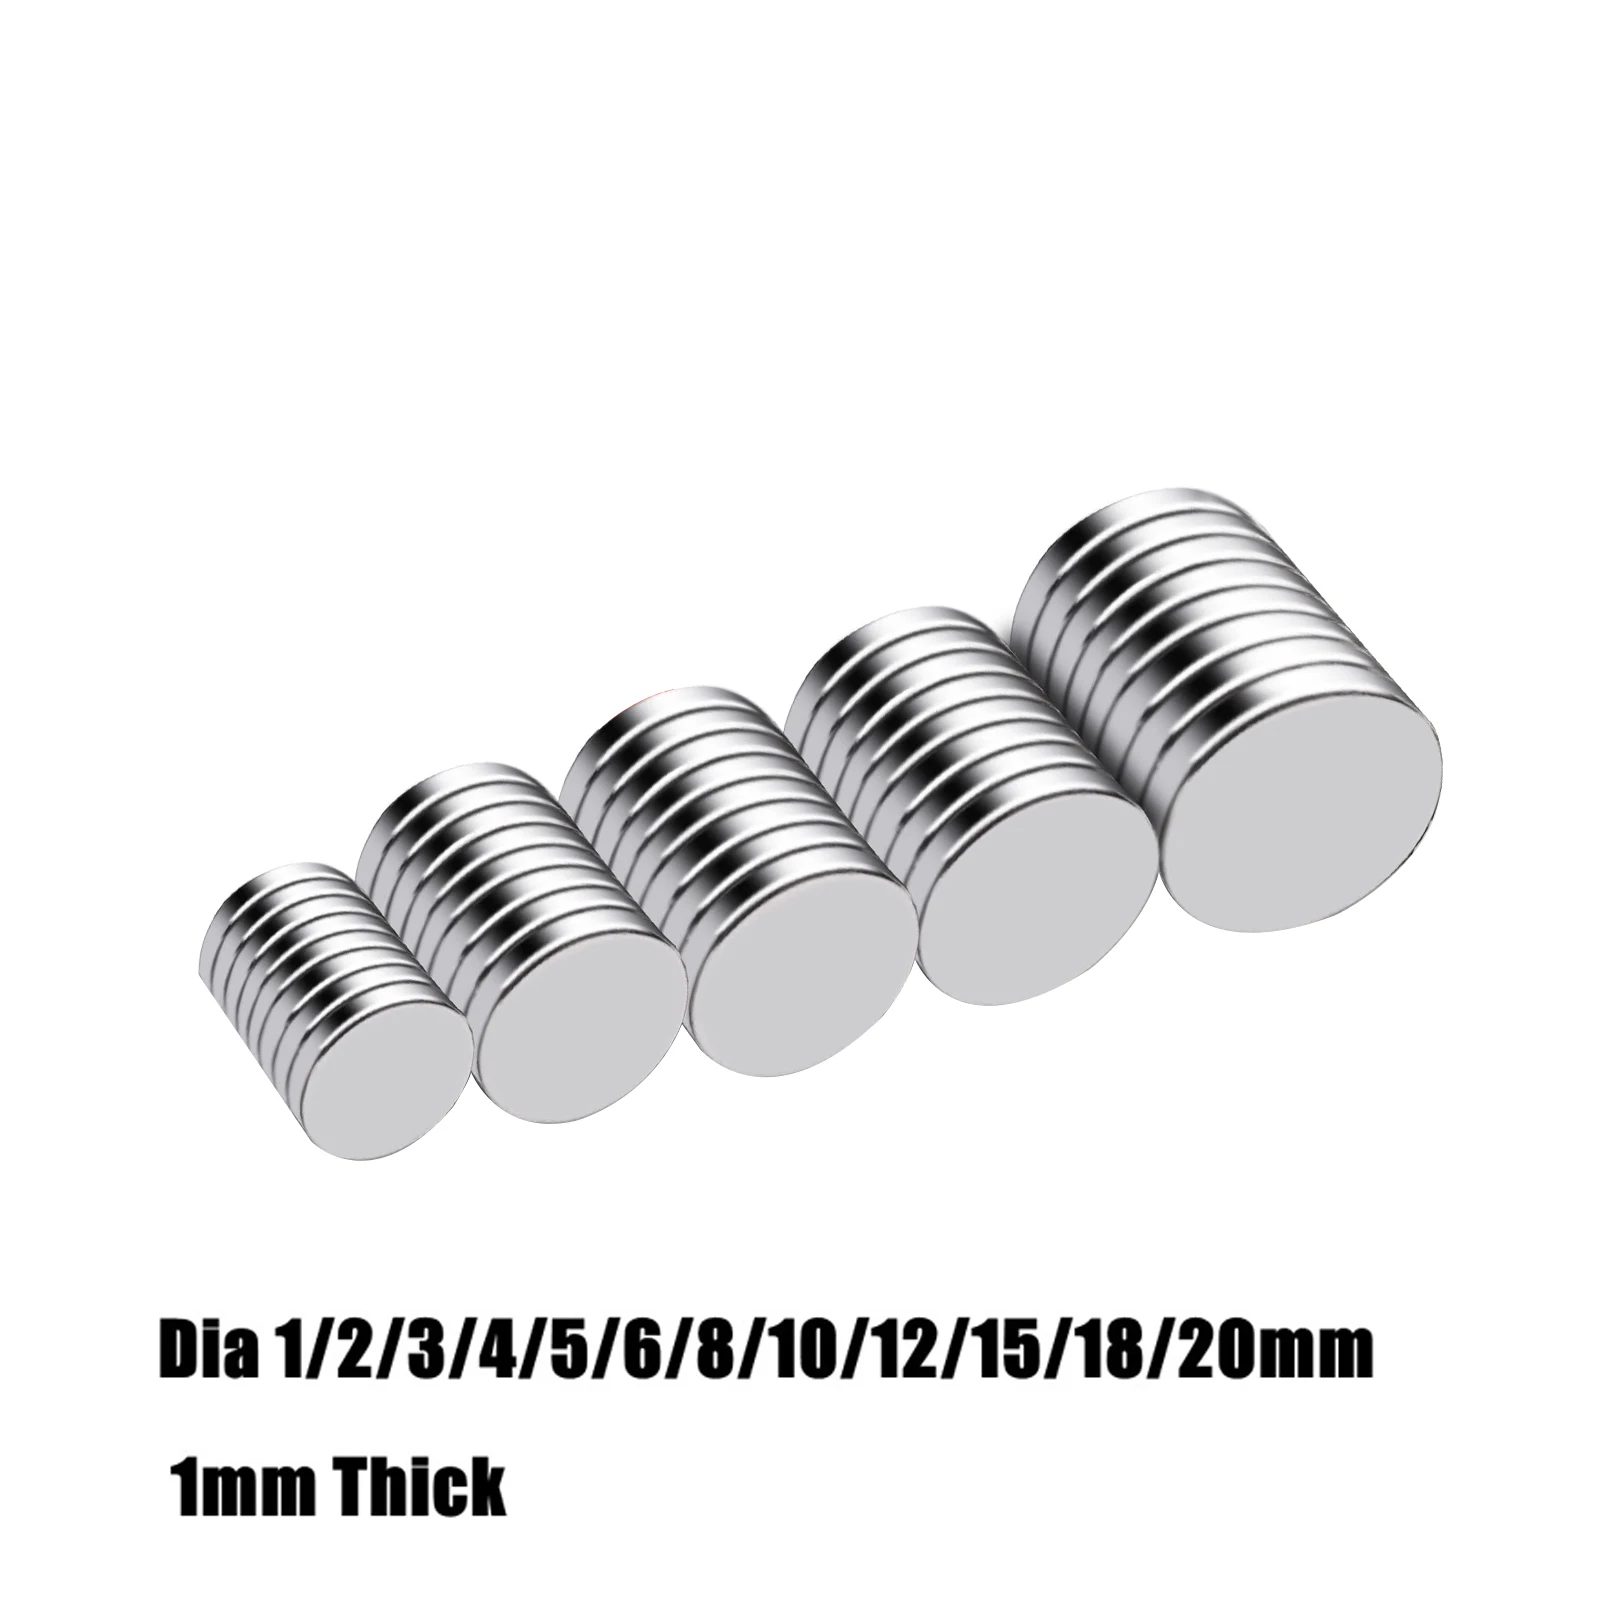 

1mm Super Strong Magnets NdFeB Neodymium Thin Small Disc Magnet Permanent N38 Dia 1/2/3/4/5/6/8/10/12/15/18/20mm imanes Disc